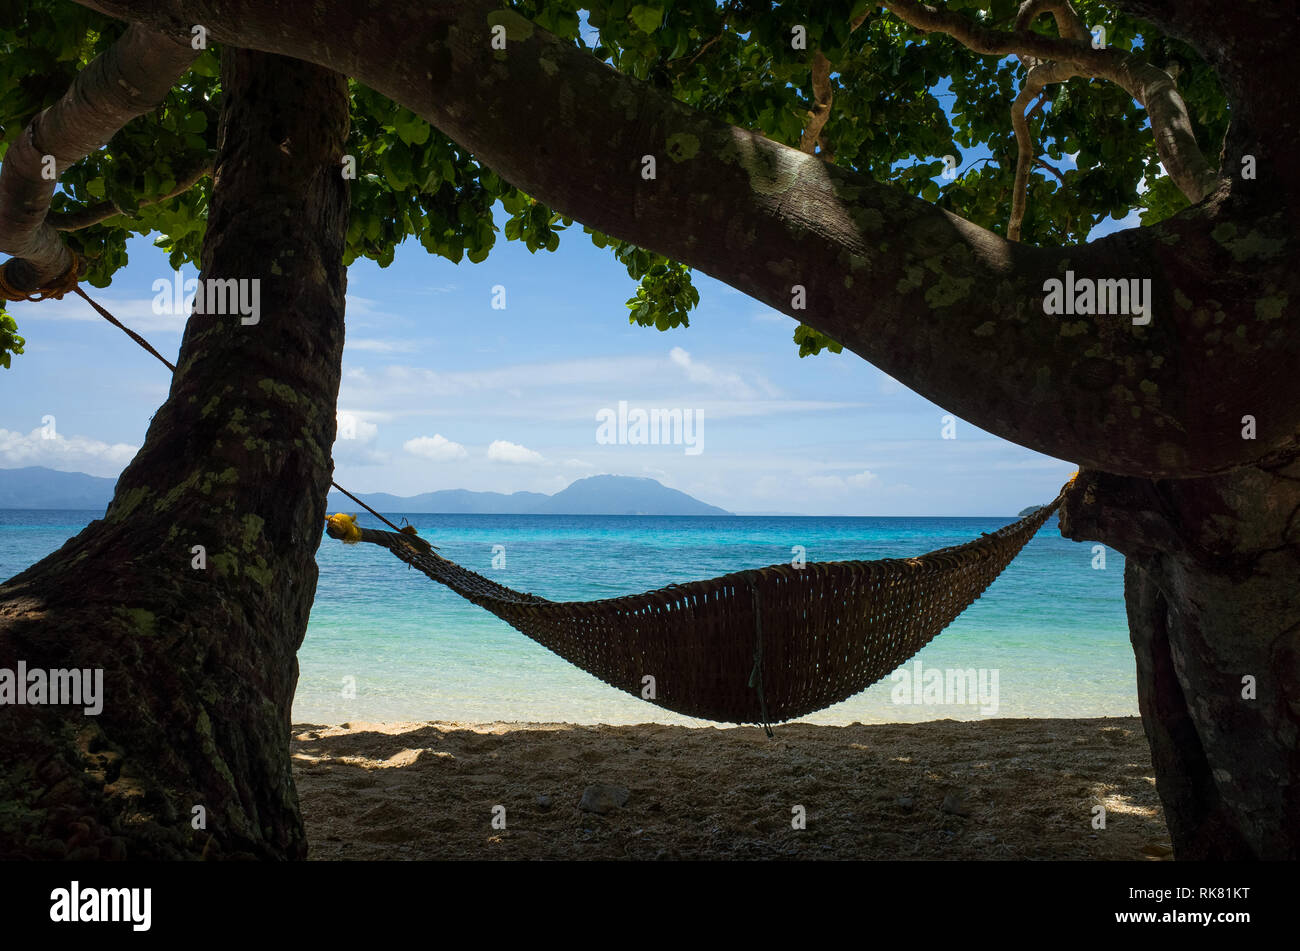 Bamboo Hammock, a Woven native style relaxation bed, with tropical sea and beach - Romblon Island, Philippines Stock Photo